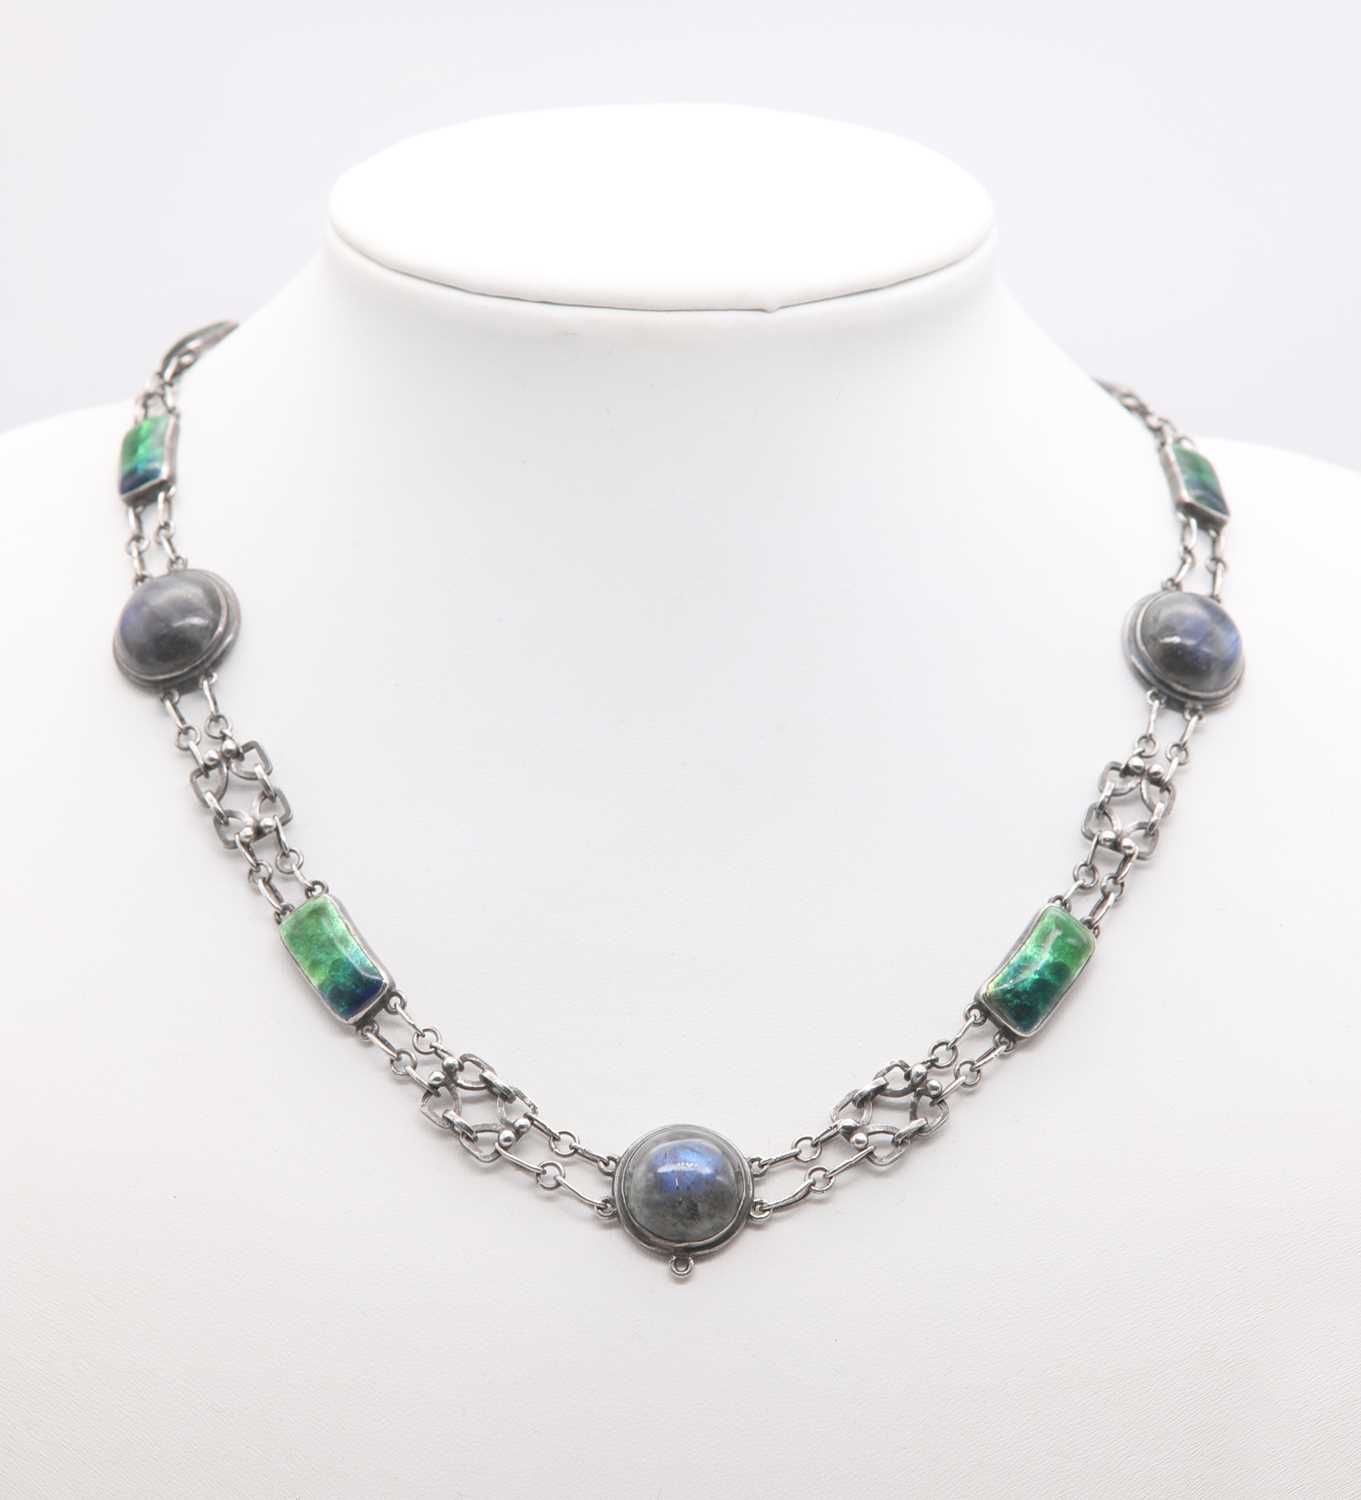 Lot 141 - An Arts & Crafts silver Newlyn enamel and labradorite necklace, c.1900